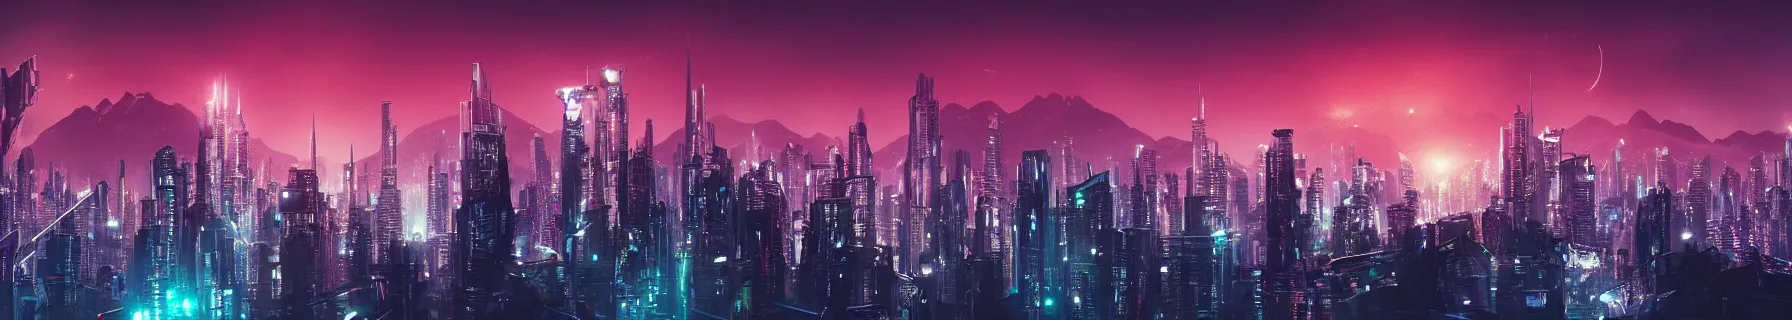 Prompt: a beautiful futuristic city skyline at night with mountains in the background, scifi, cyberpunk